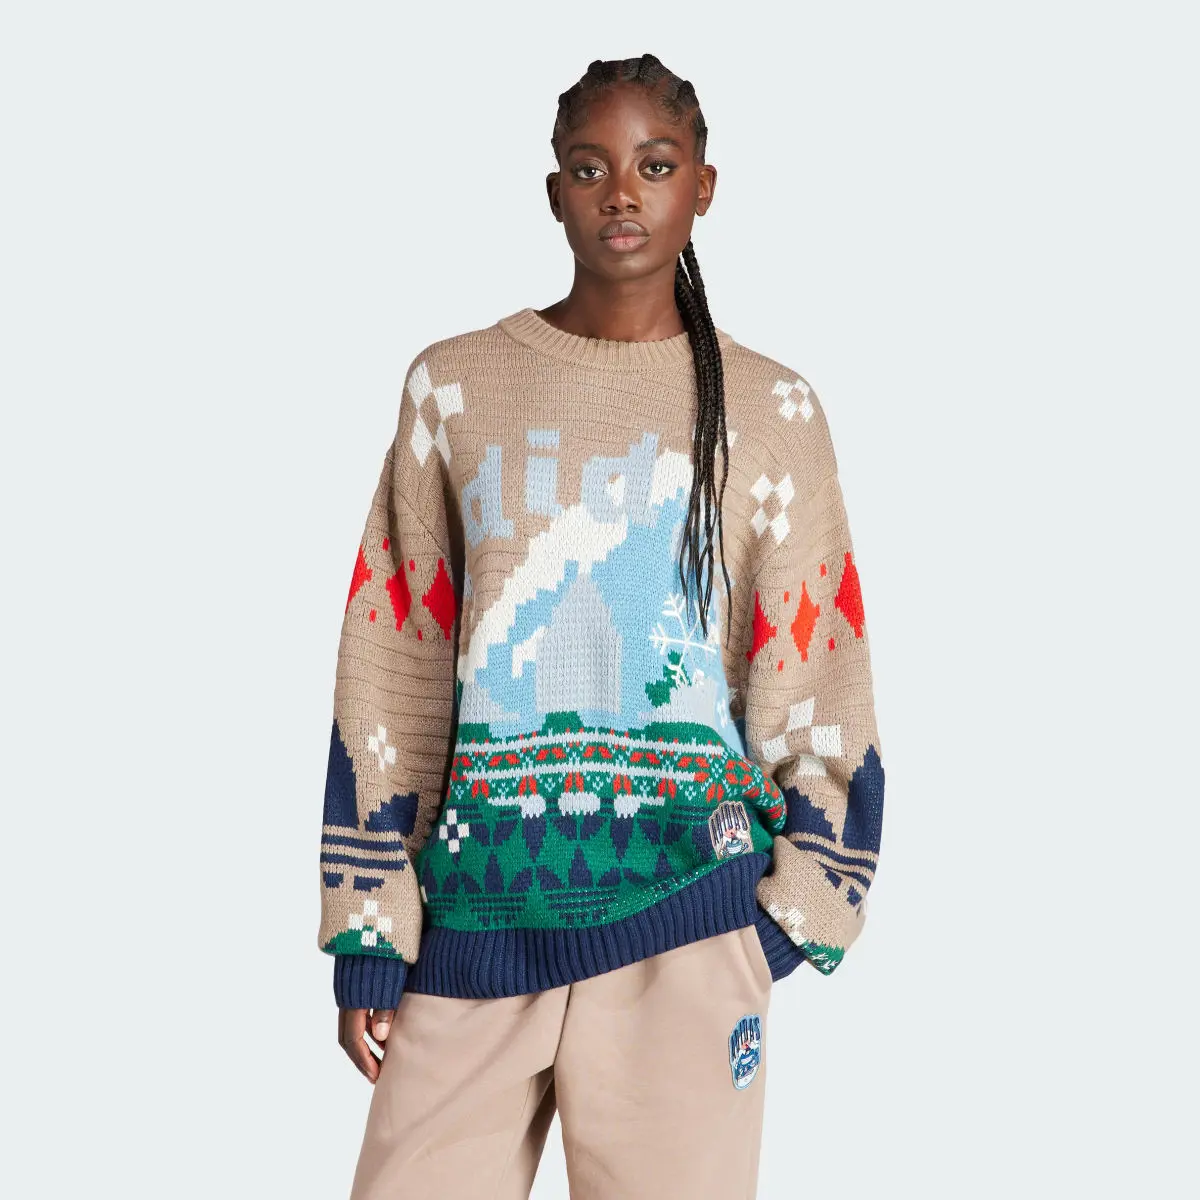 Adidas Holiday Sweater (Gender Neutral). 2